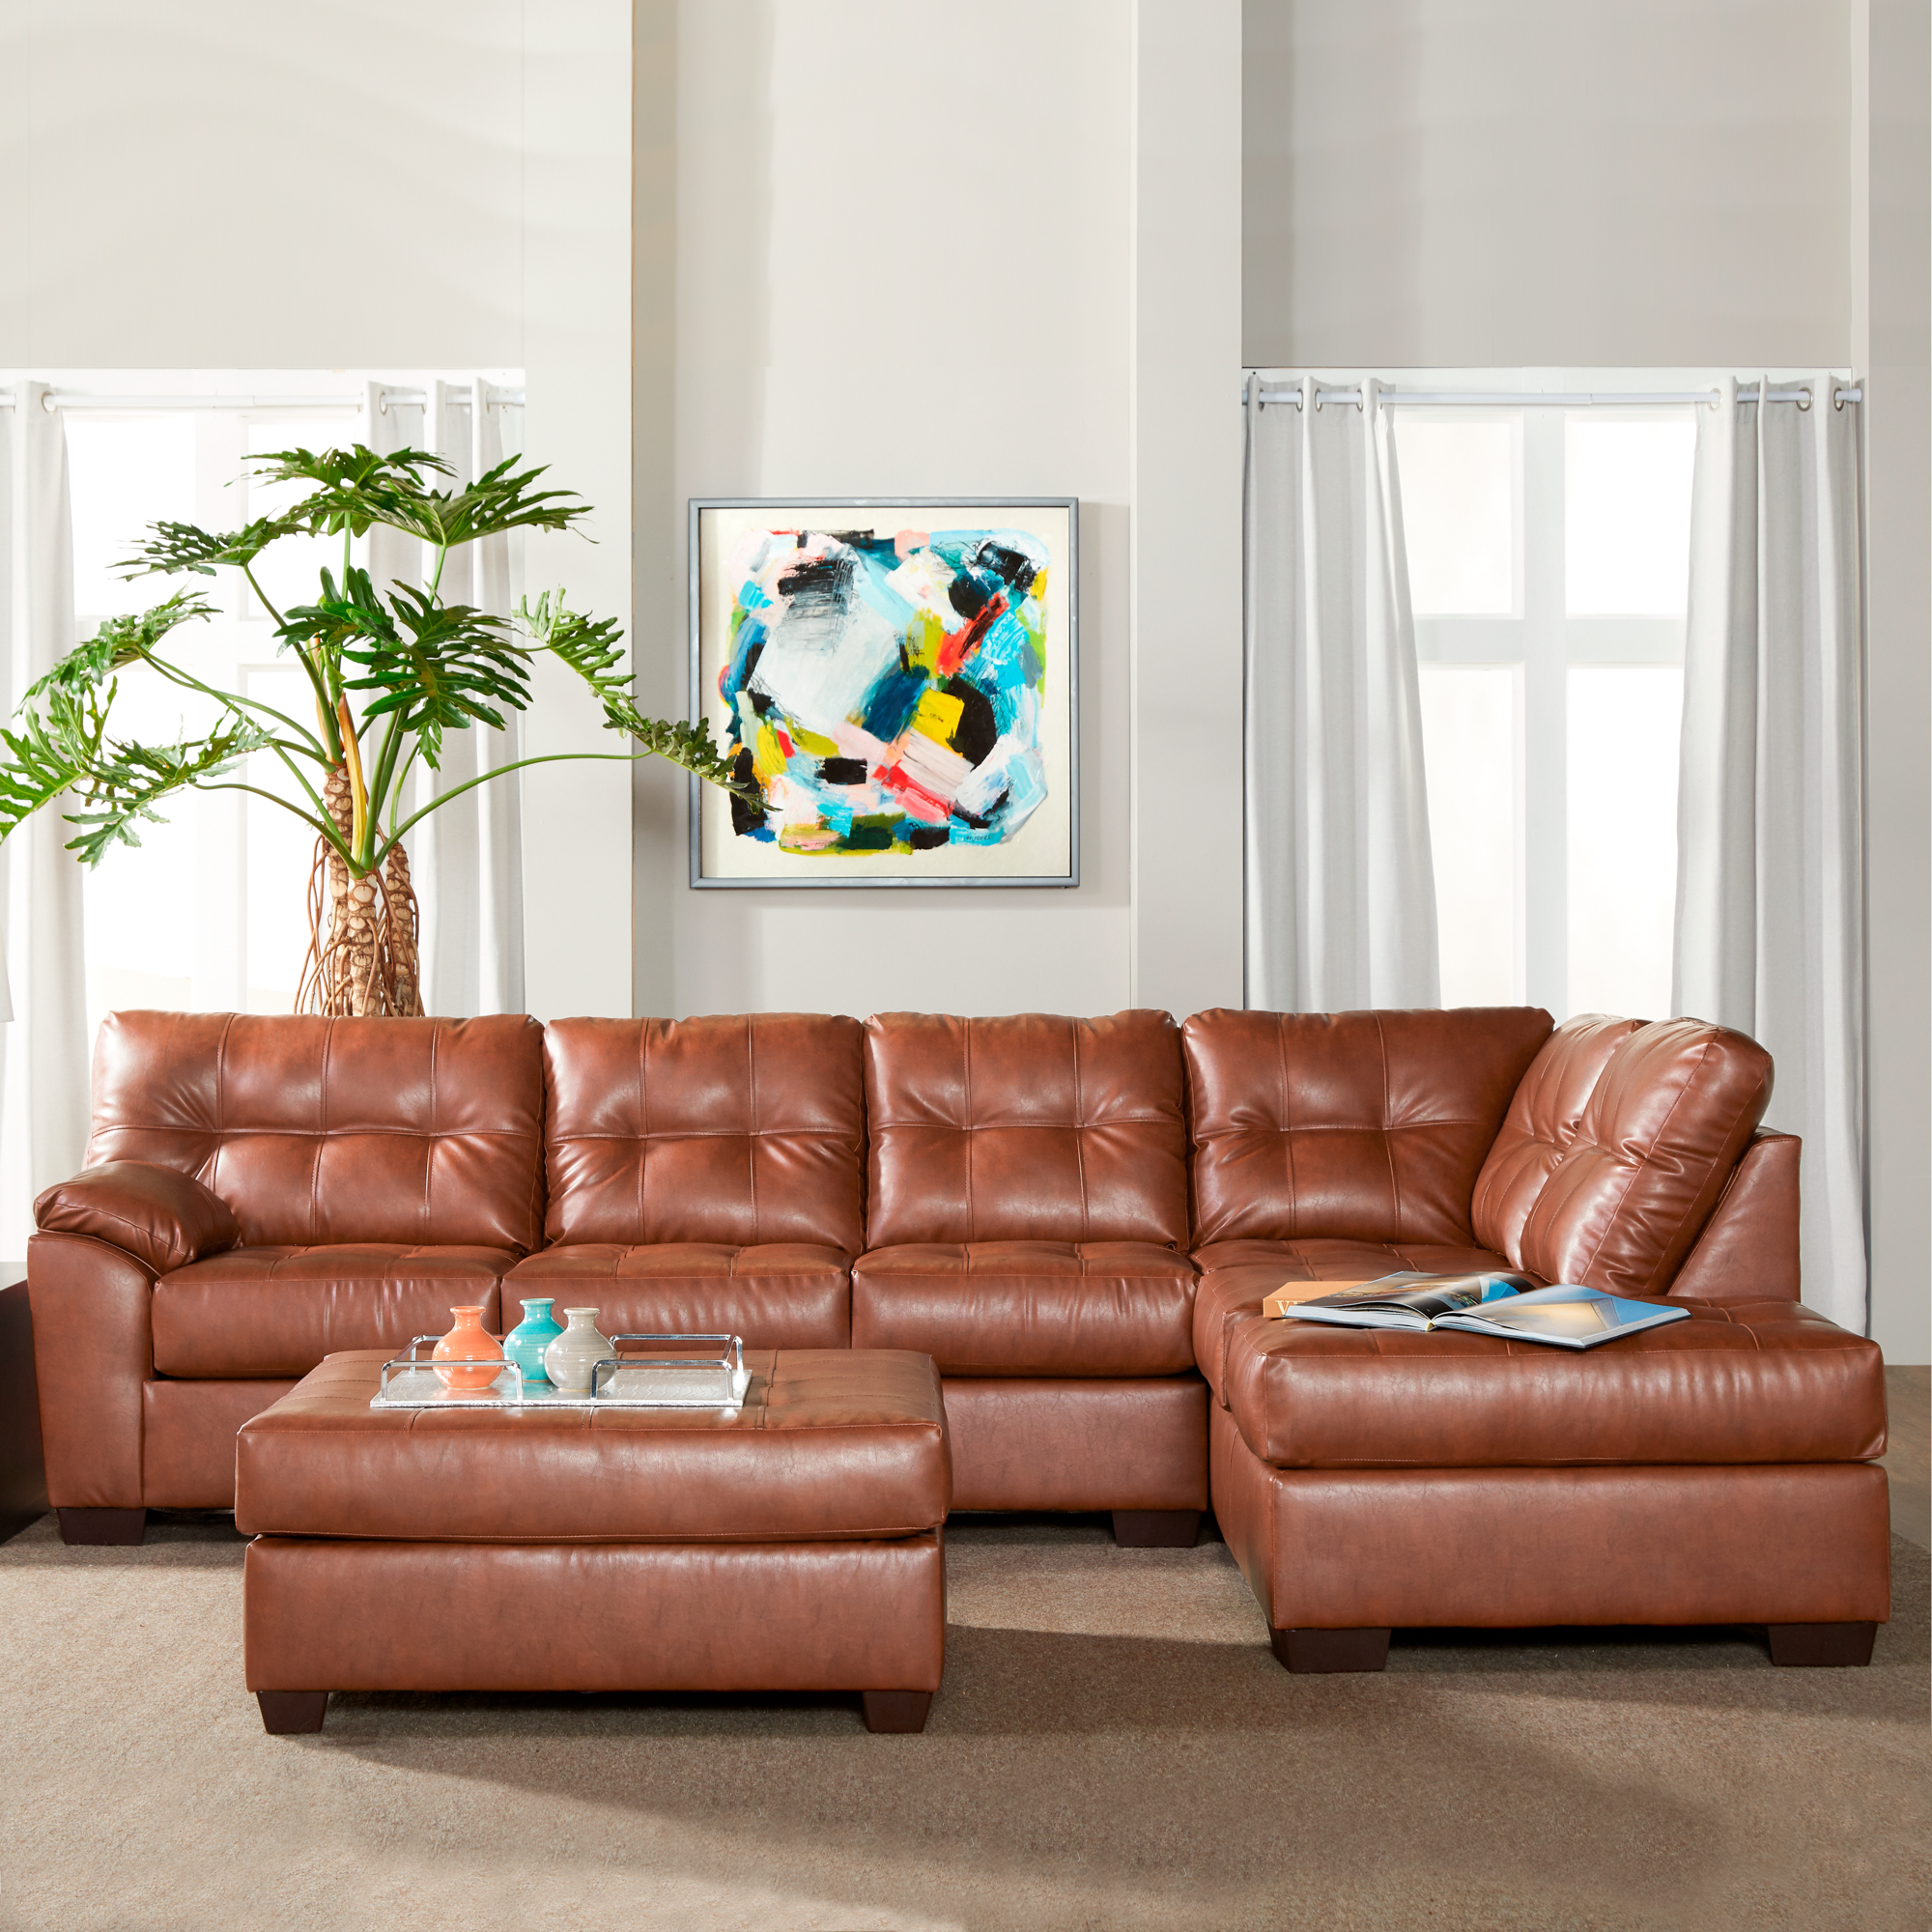 Addington Co Dallas Vegan Leather Sectional Sofa with Right Facing Chaise for Living Room, L-Shape, 6-Seats